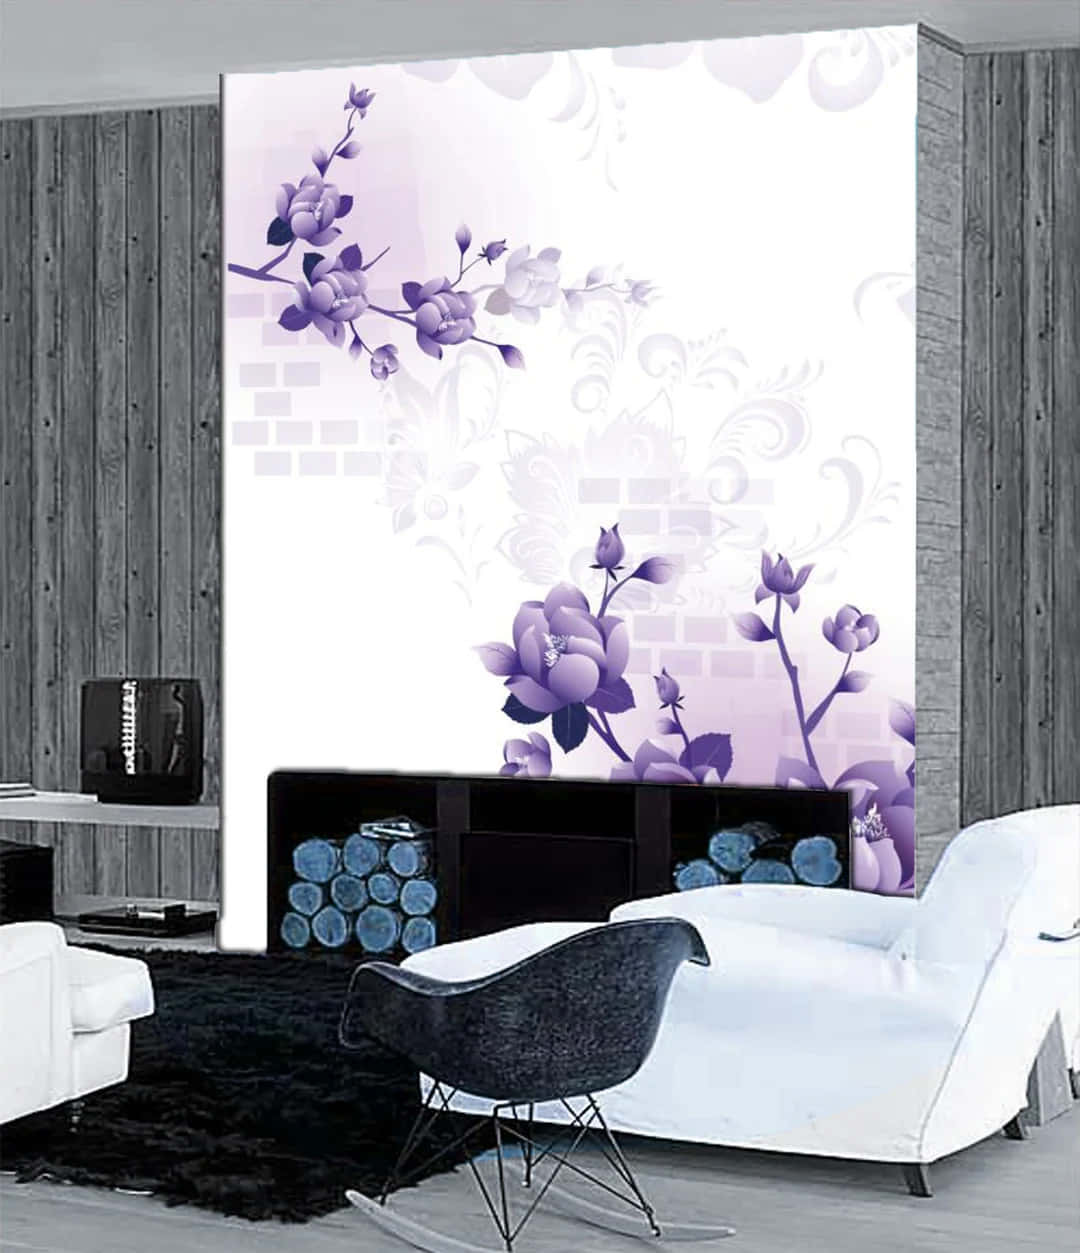 Bring a royal shimmer to your walls with the Purple Decor wallpaper Wallpaper